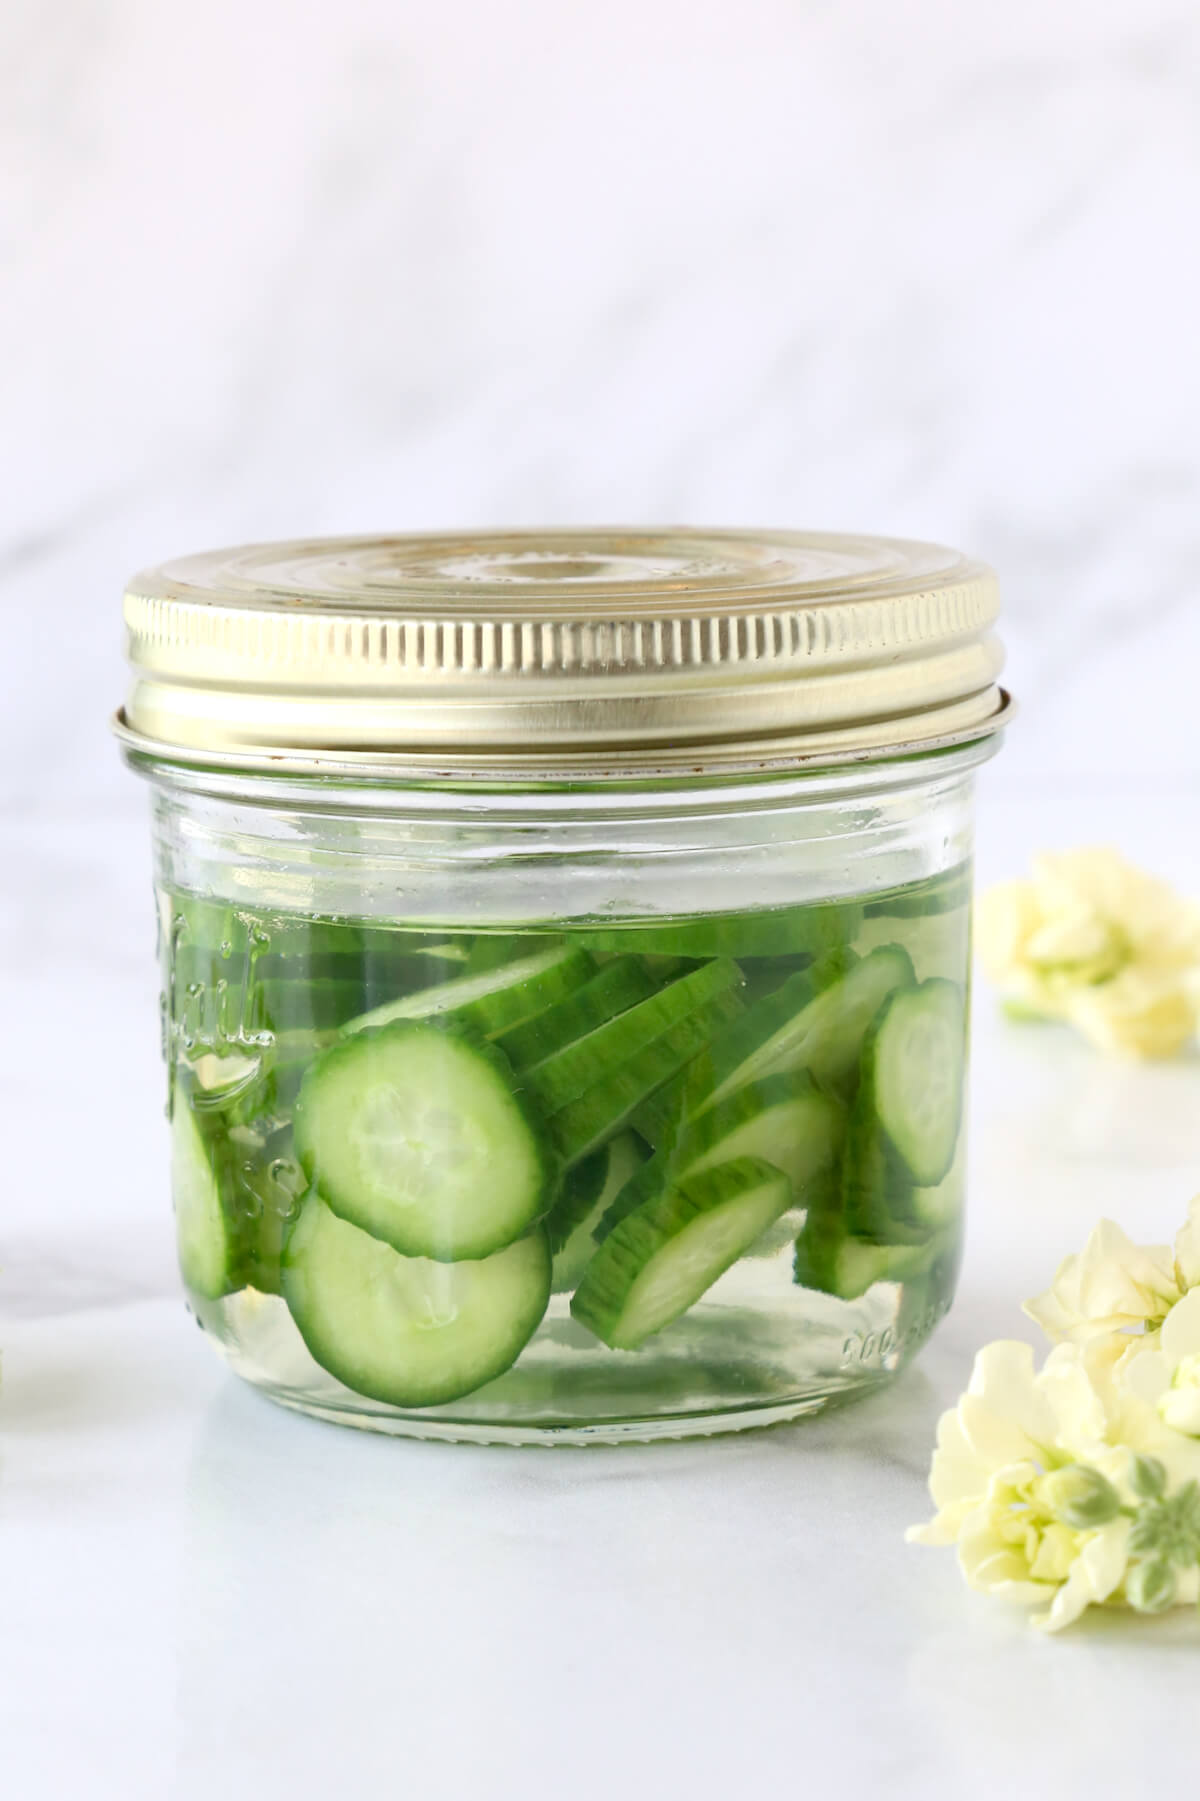 A jar filled with tequila and sliced cucumbers.